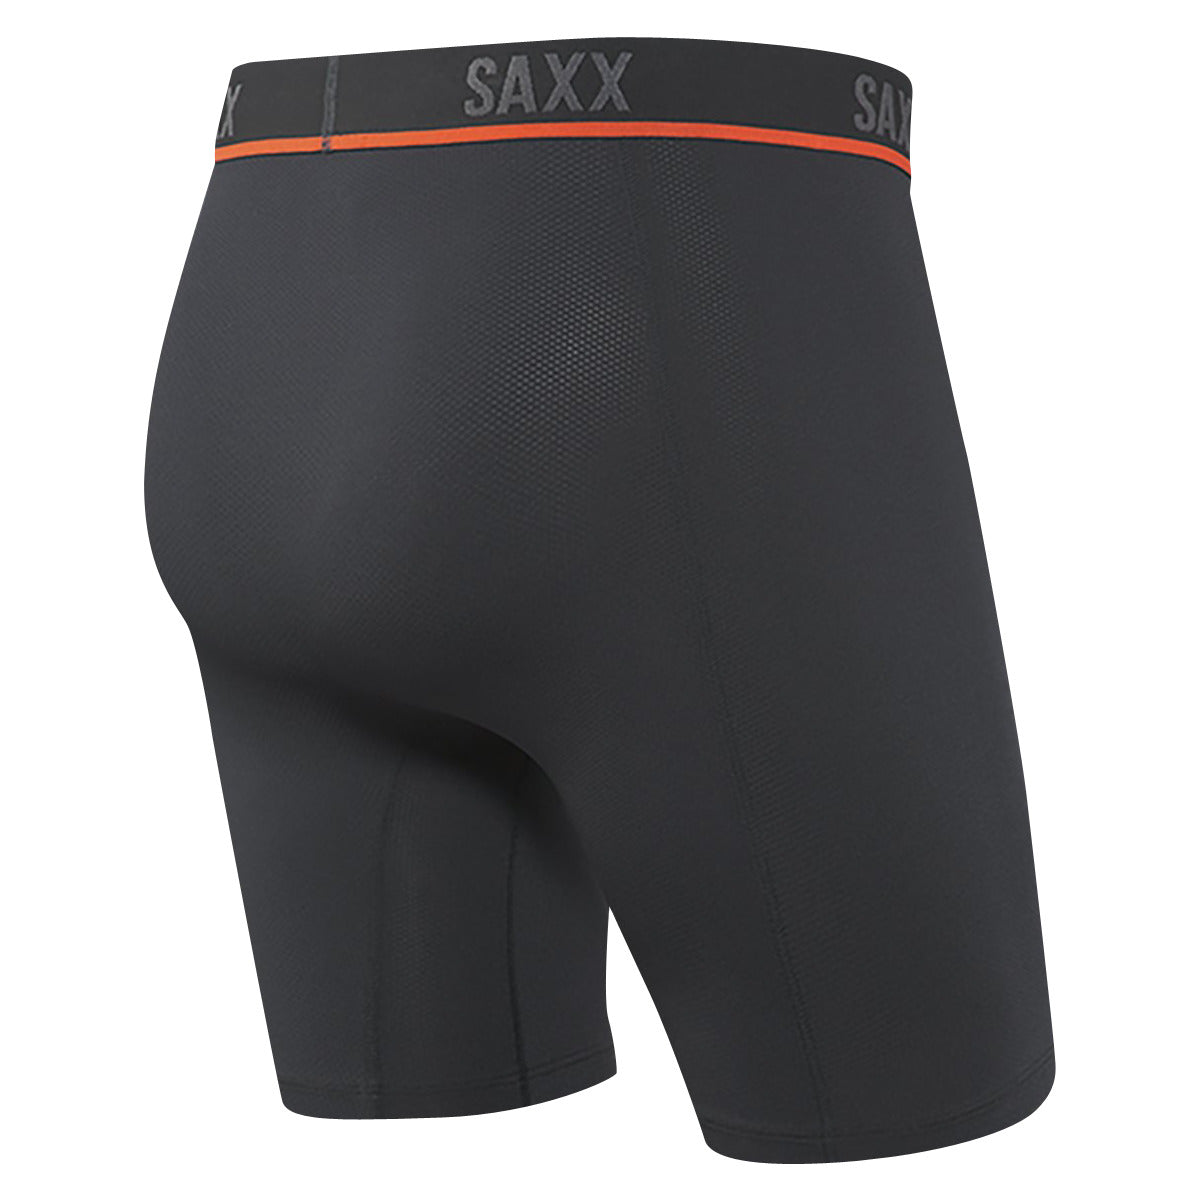 SAXX Kinetic HD Long Boxer Brief in  by GOHUNT | SAXX - GOHUNT Shop